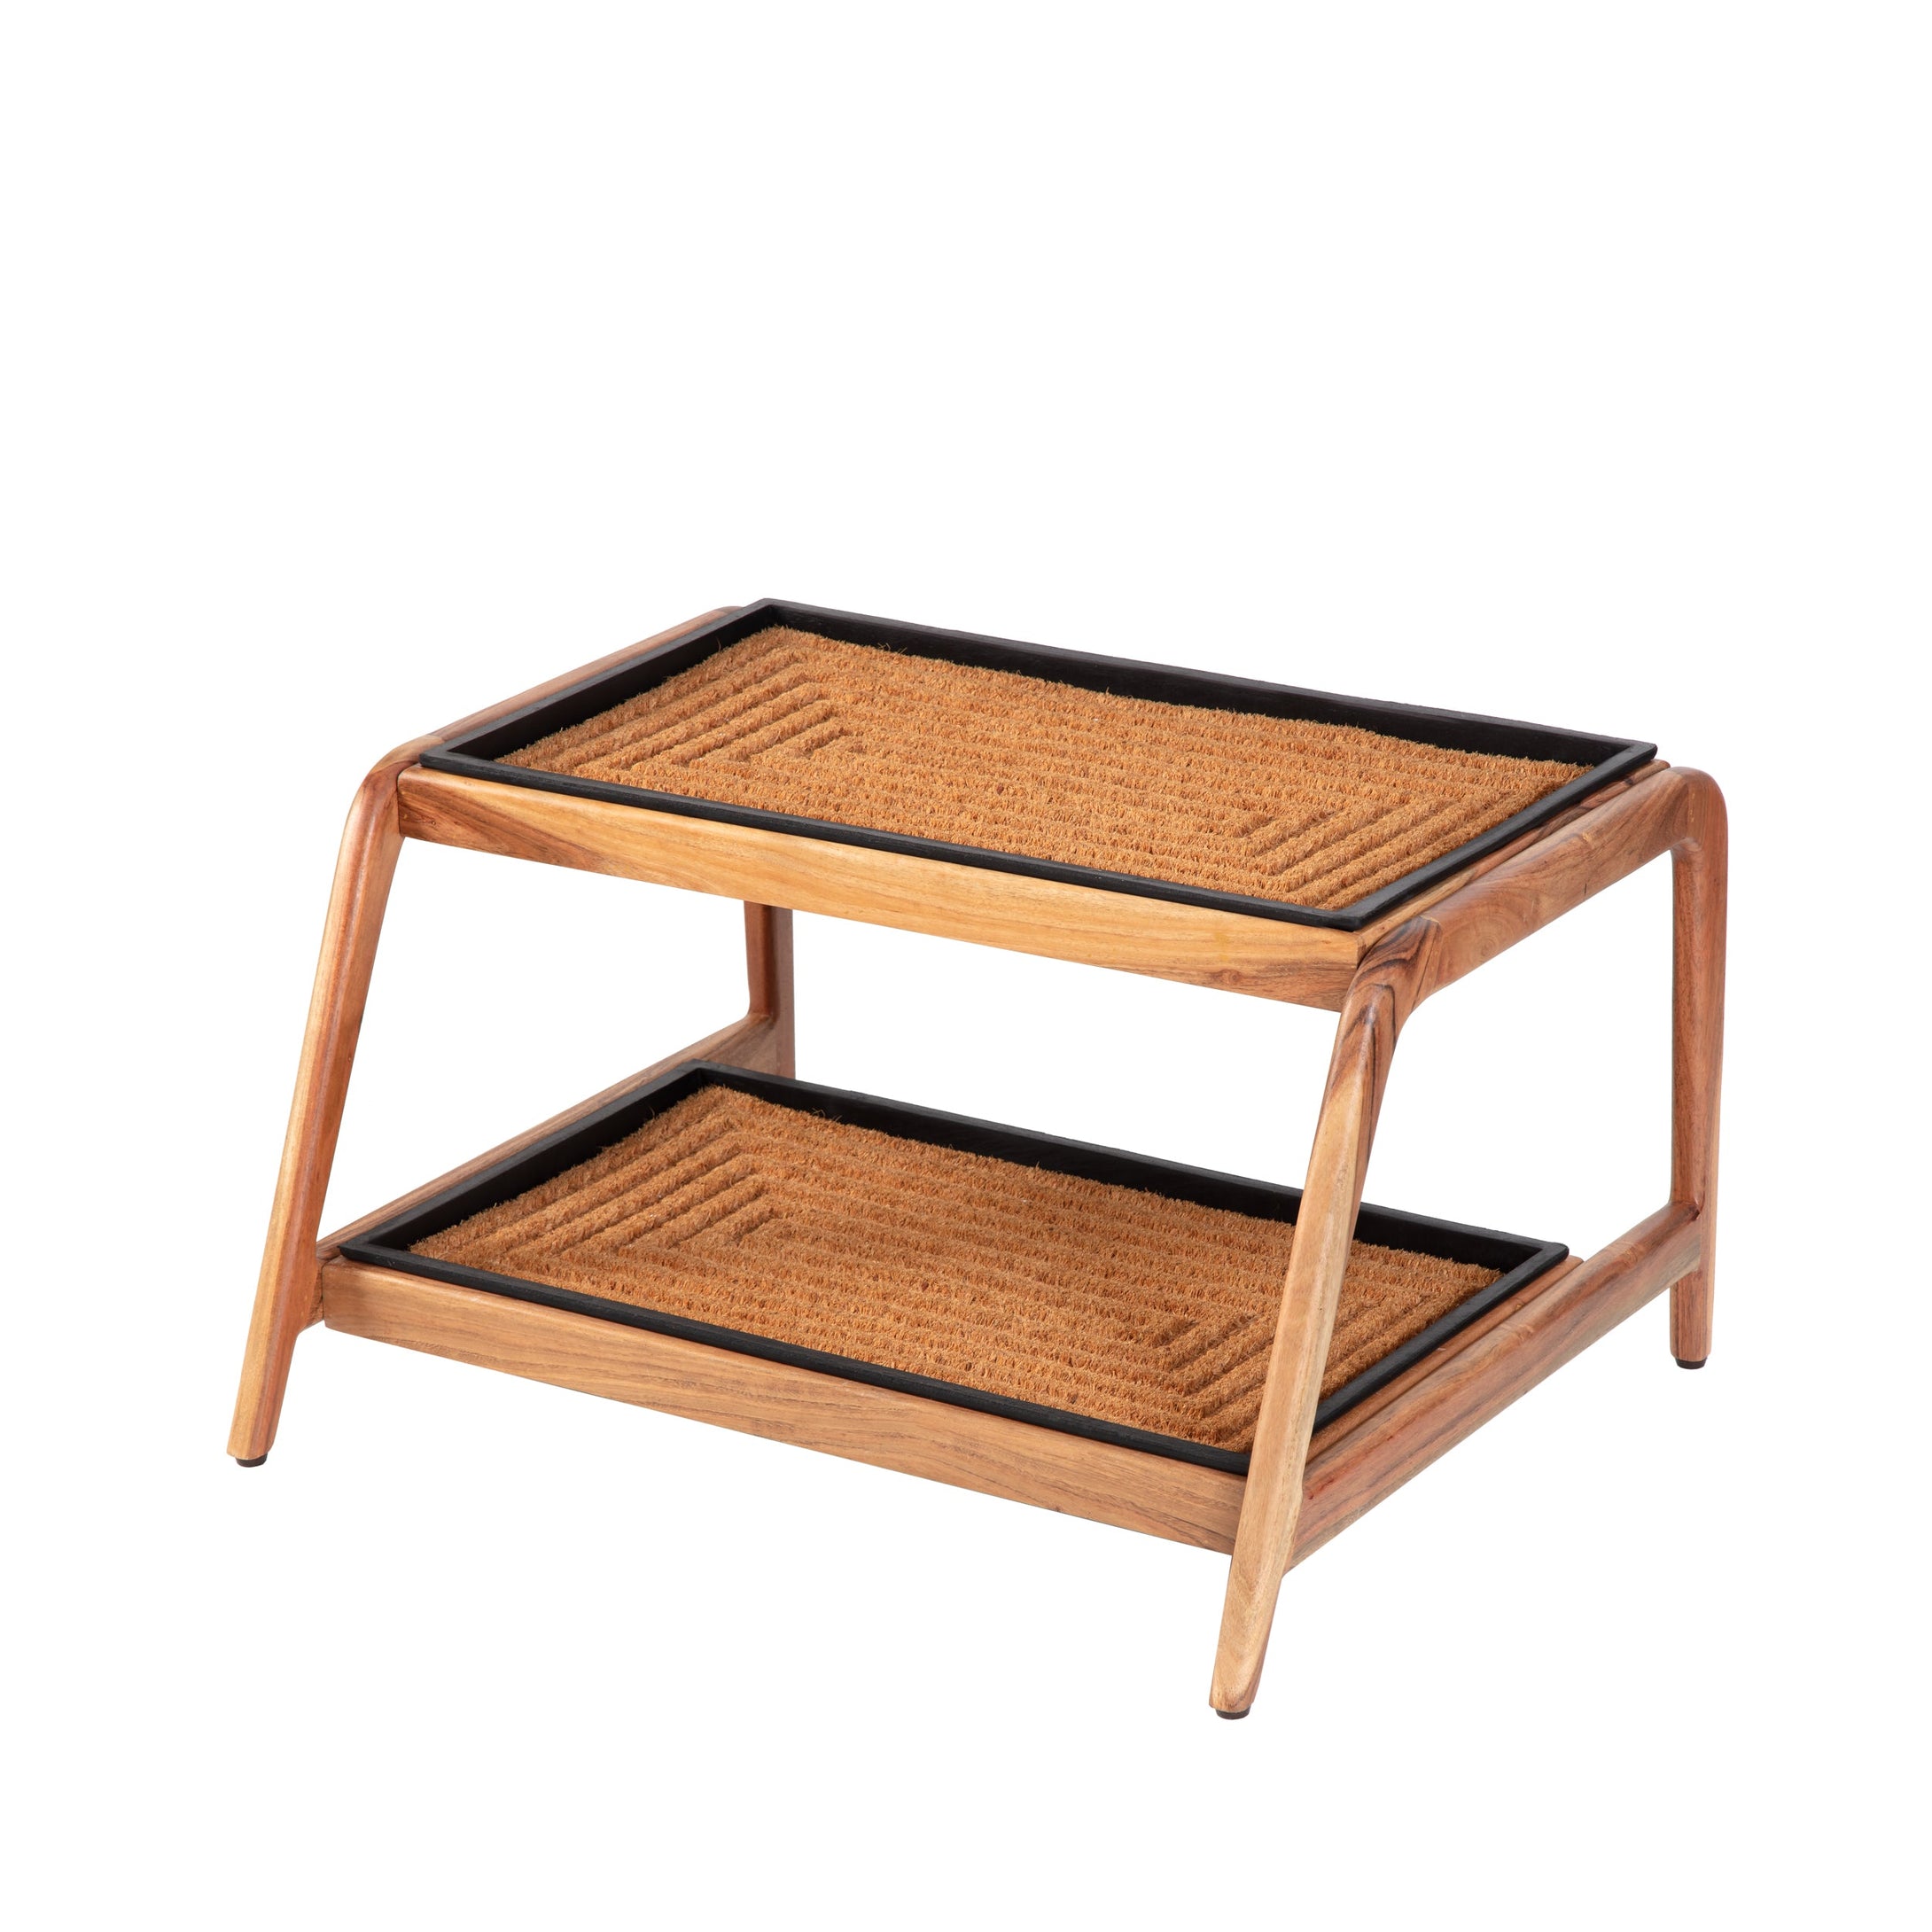 Wooden Boot Tray (Double Tier) - Rectangle Ripple (018)